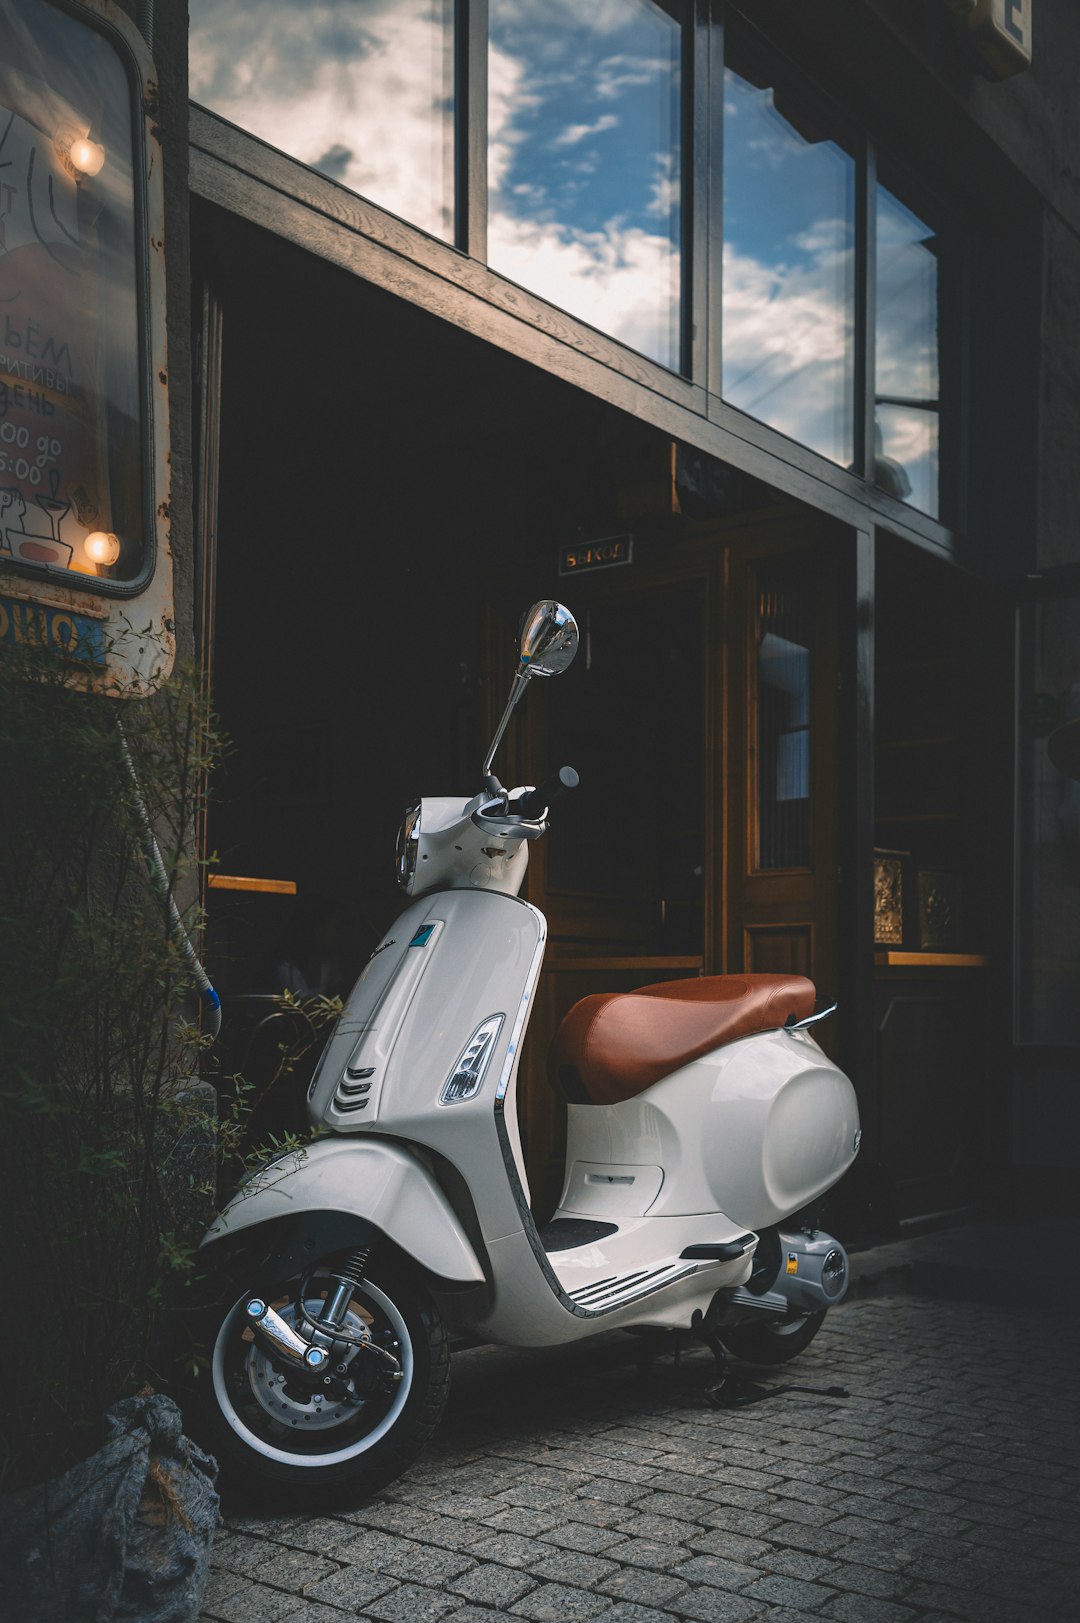 white motor scooter parked beside building during night time